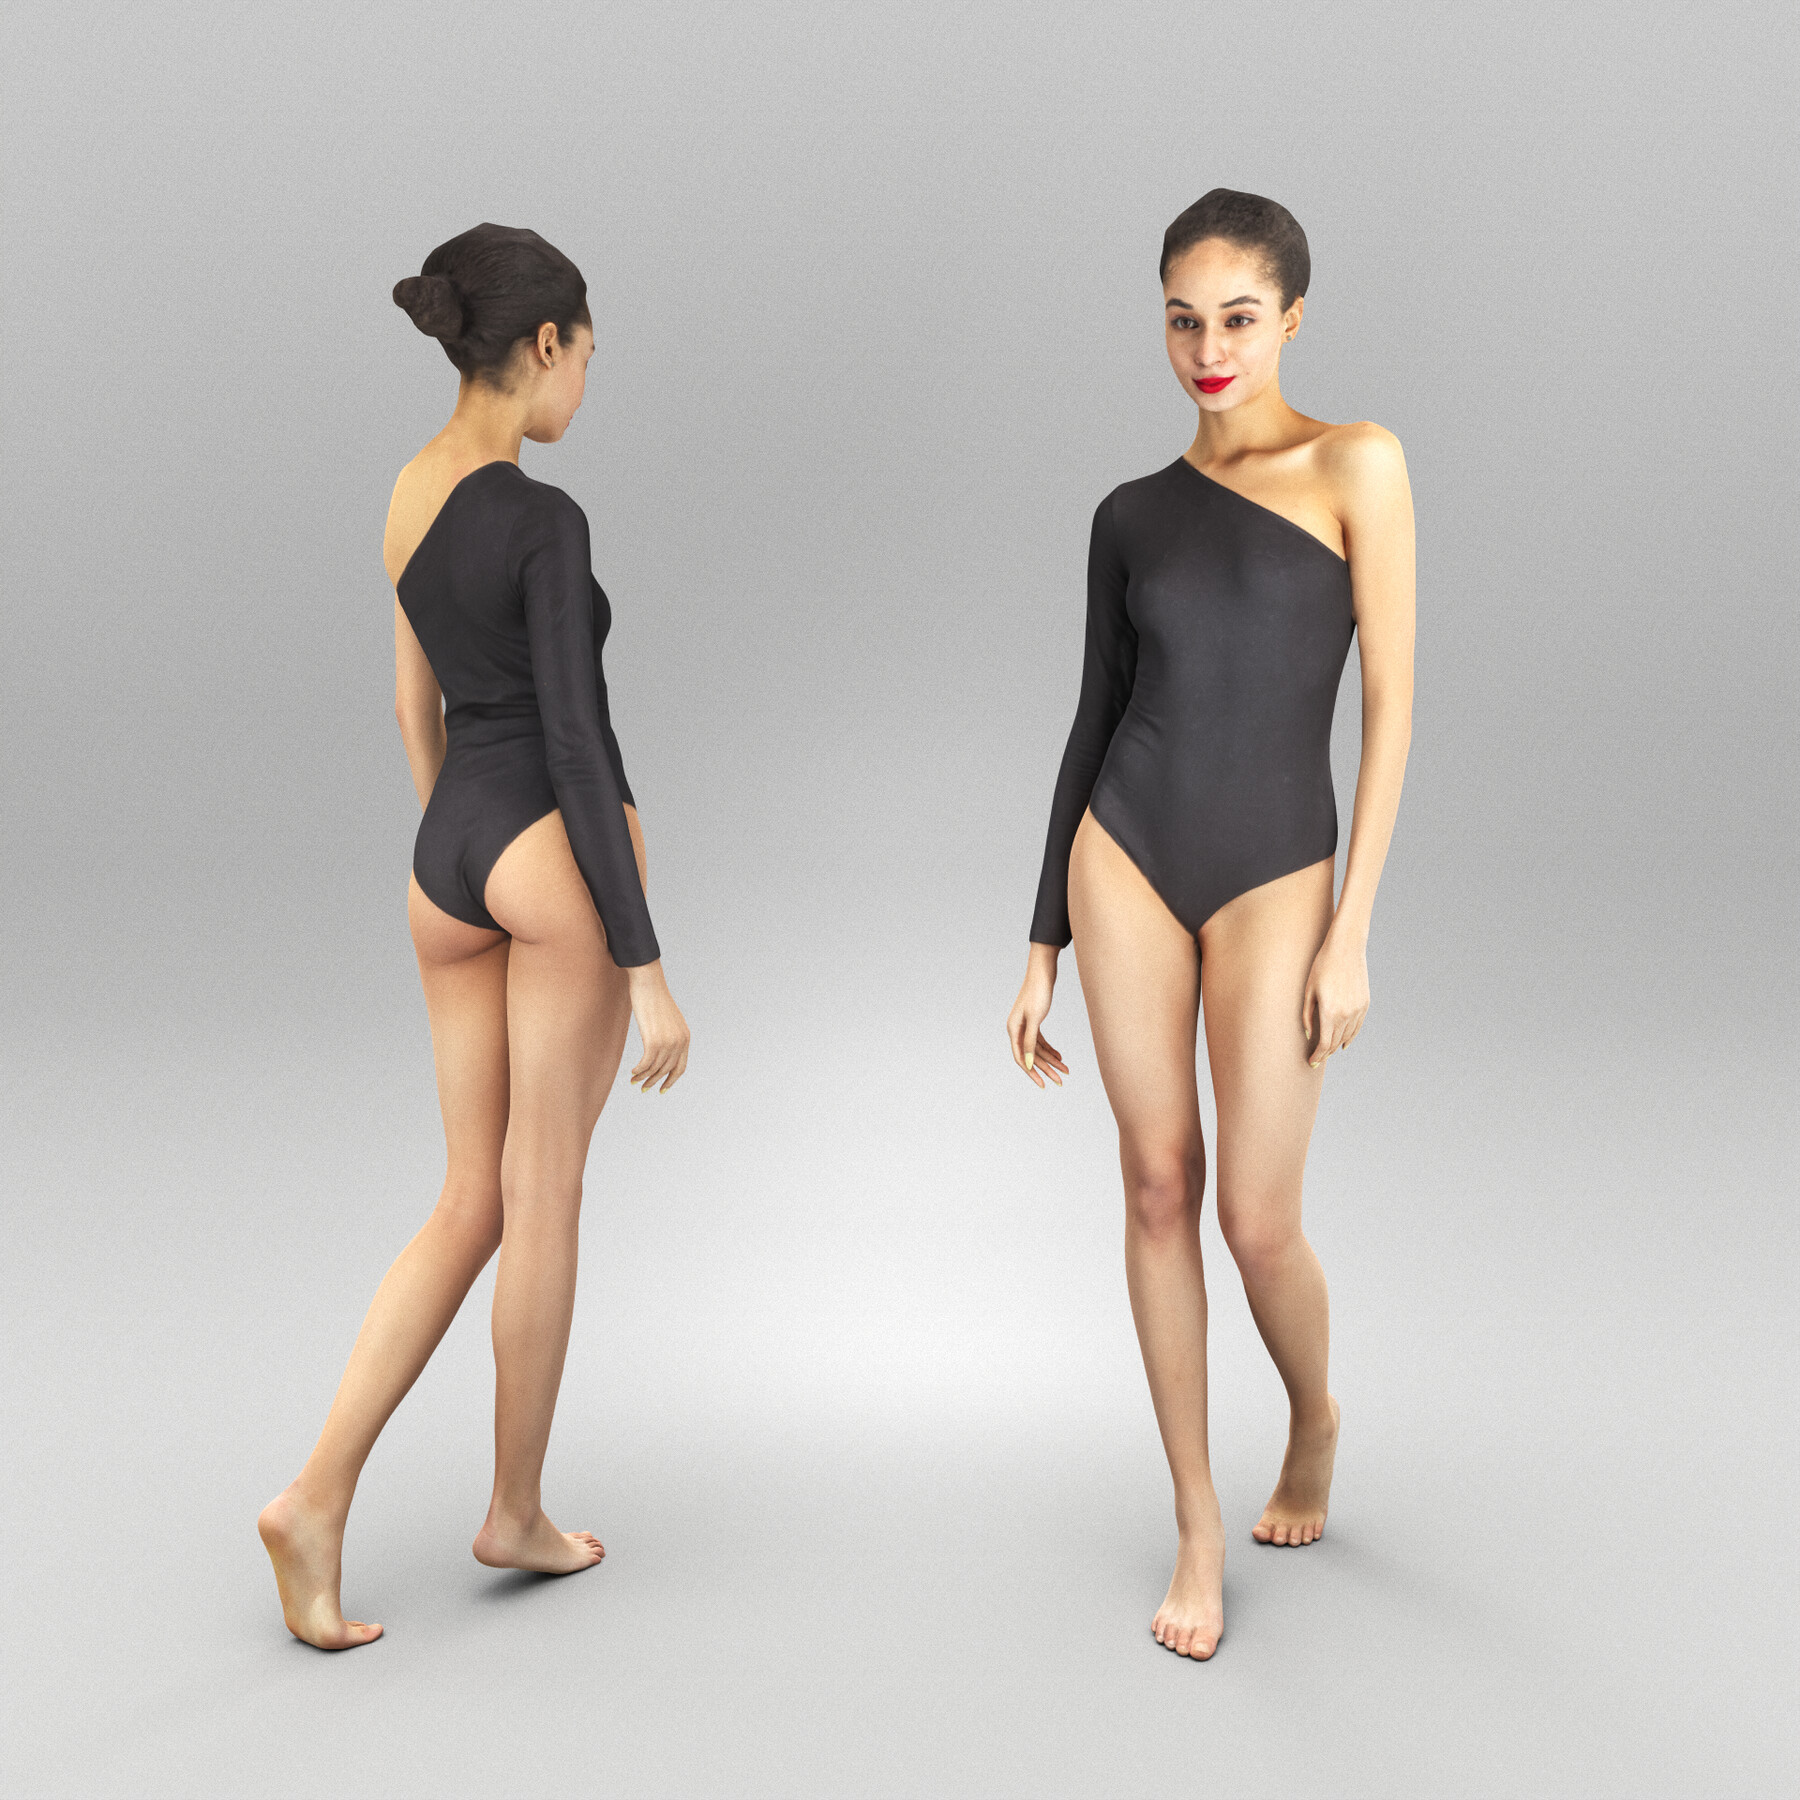 Photorealistic illustration of a girl in leotards from behind on